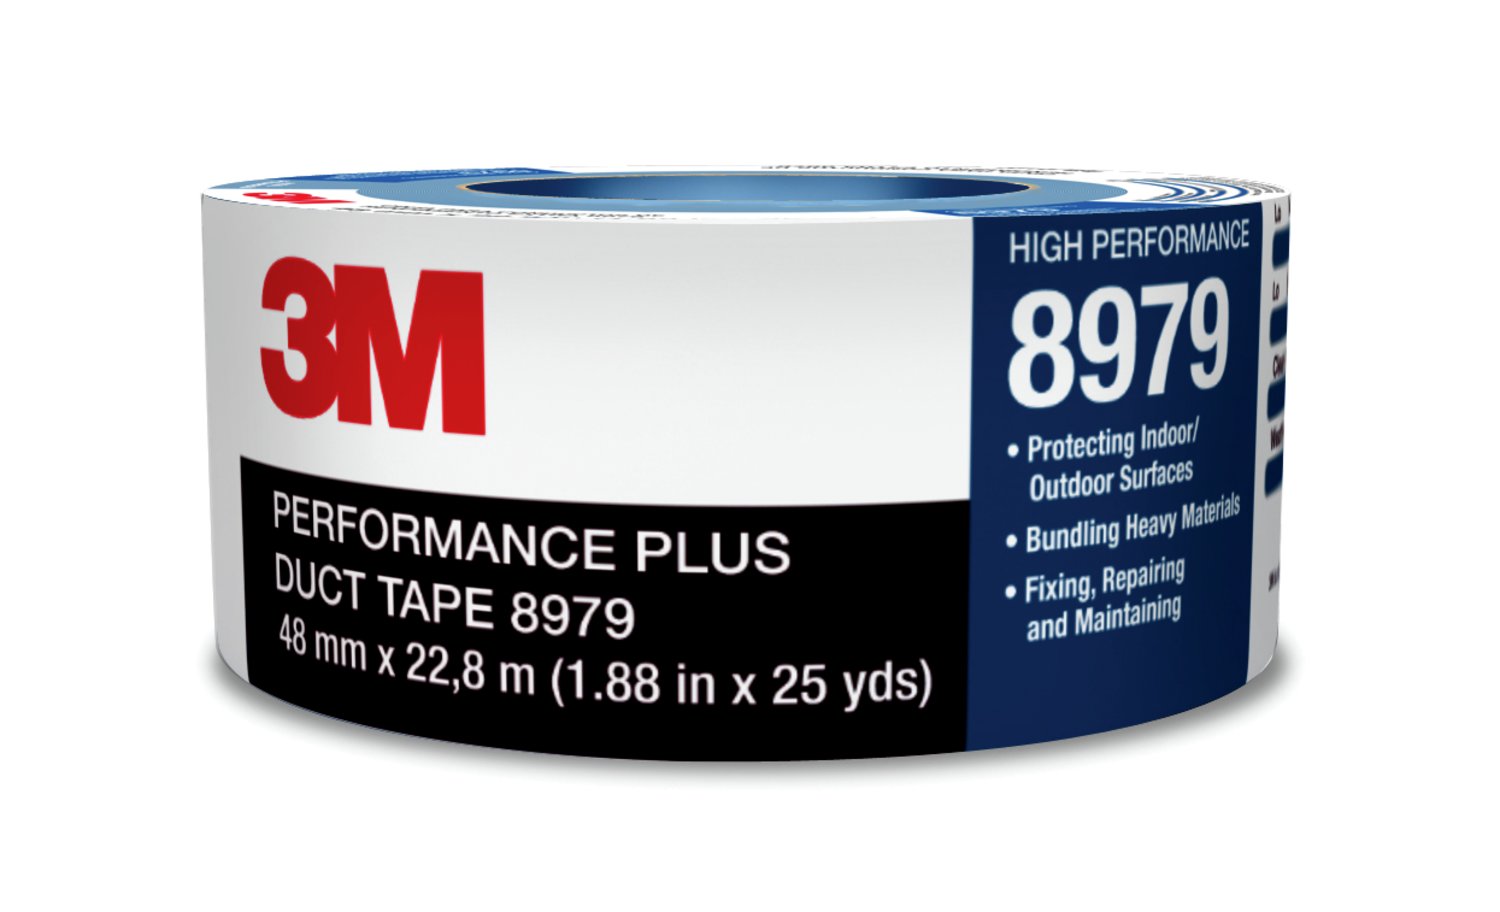 7000001329 - 3M Performance Plus Duct Tape 8979, Slate Blue, 48 mm x 22.8 m 12.1
mil, 12 Roll/Case, Conveniently Packaged